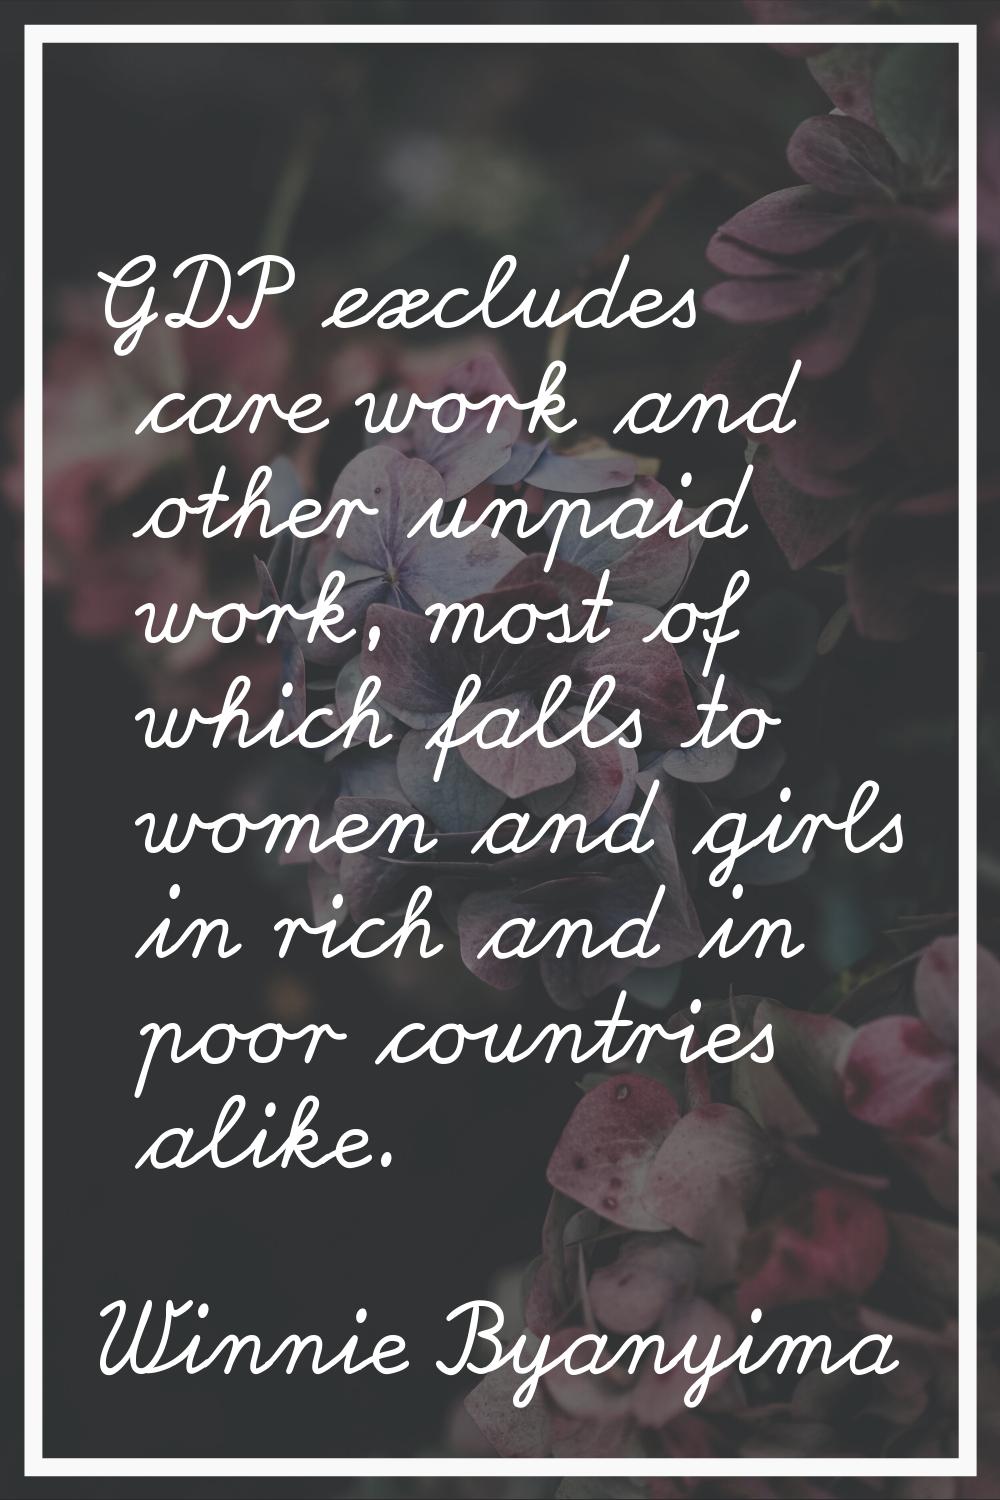 GDP excludes care work and other unpaid work, most of which falls to women and girls in rich and in